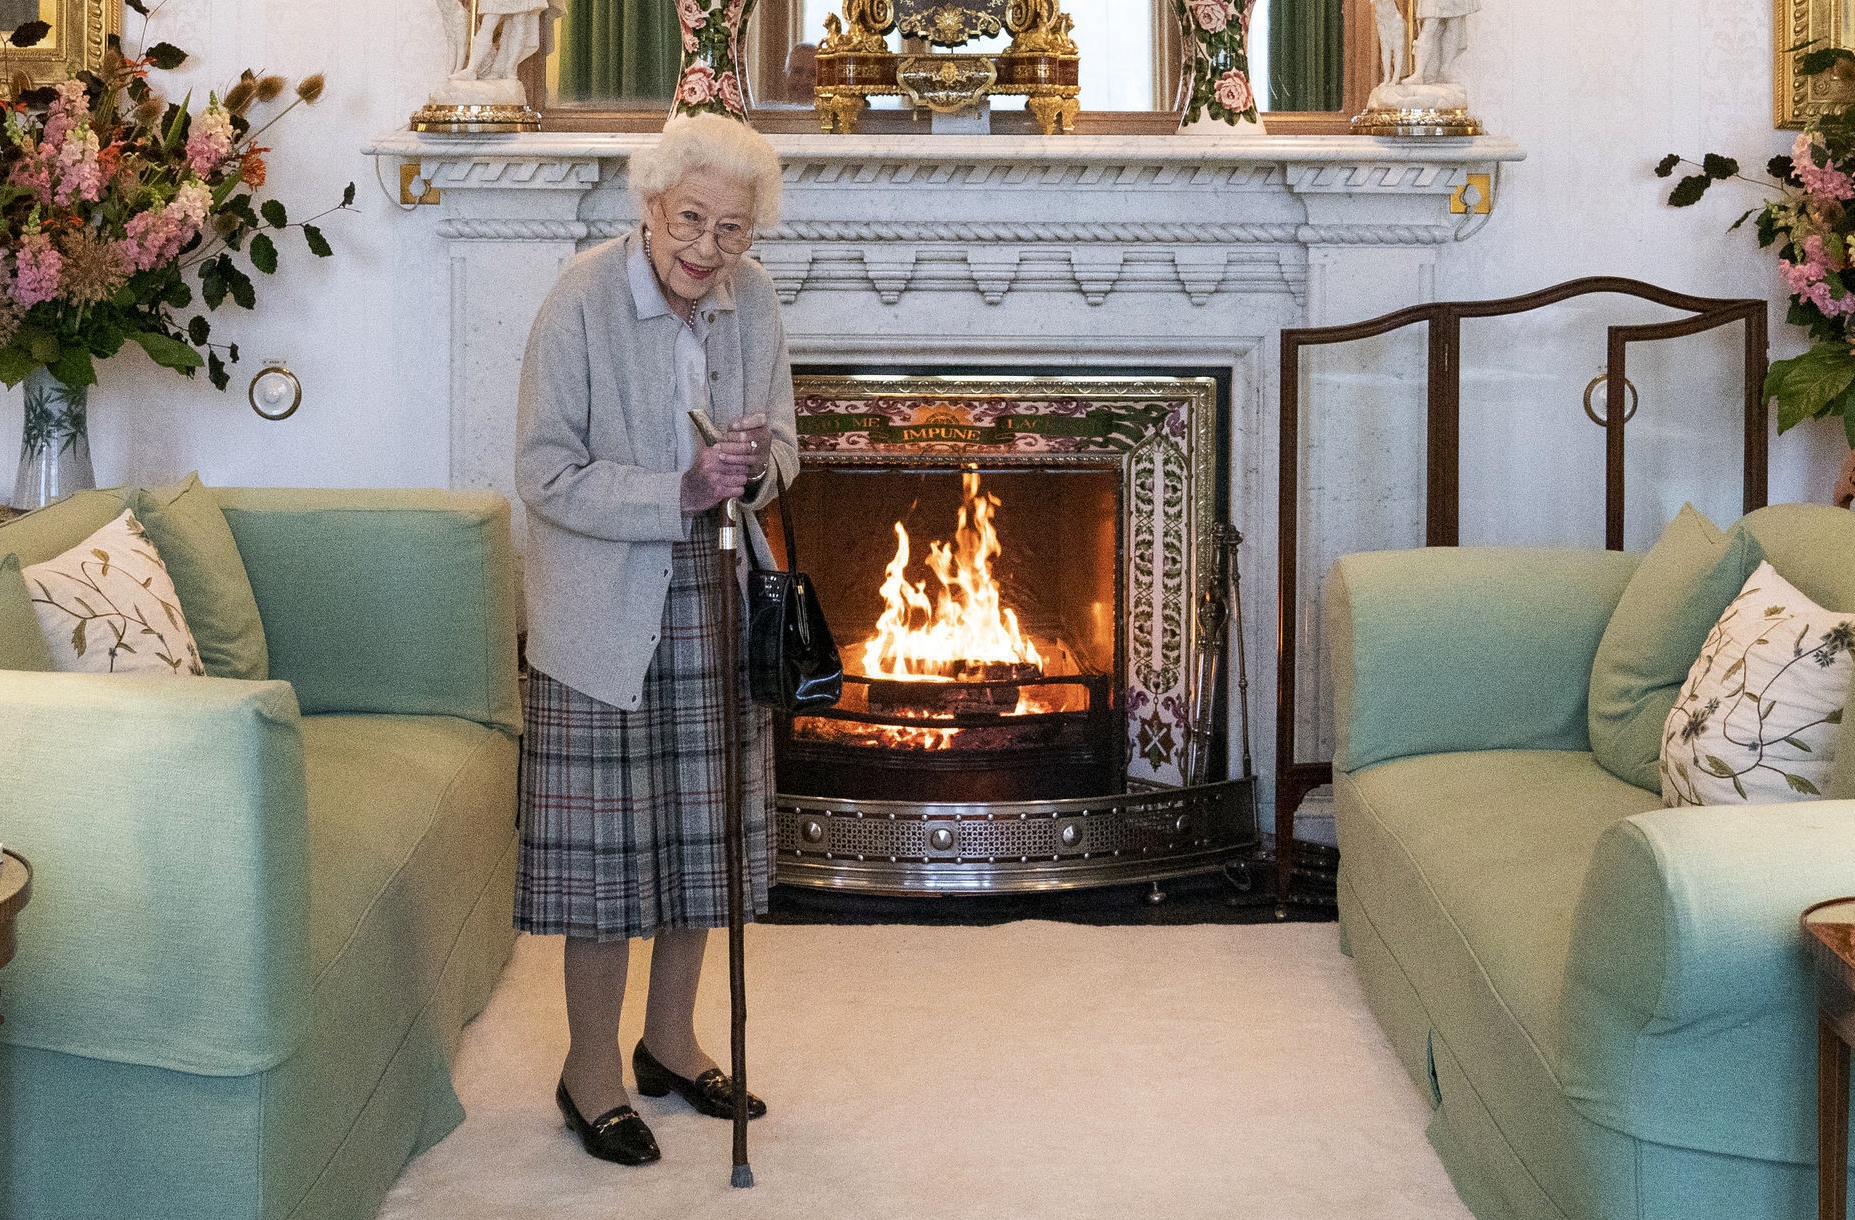 FILE - Britain's Queen Elizabeth II waits in the Drawing Room before receiving Liz Truss for an audience at Balmoral, in Scotland, Tuesday, Sept. 6, 2022, where Truss was invited to become Prime Minister and form a new government. Buckingham Palace says Queen Elizabeth II is under medical supervision as doctors are “concerned for Her Majesty’s health.” The announcement comes a day after the 96-year-old monarch canceled a meeting of her Privy Council and was told to rest.(Jane Barlow/Pool Photo via AP, File)